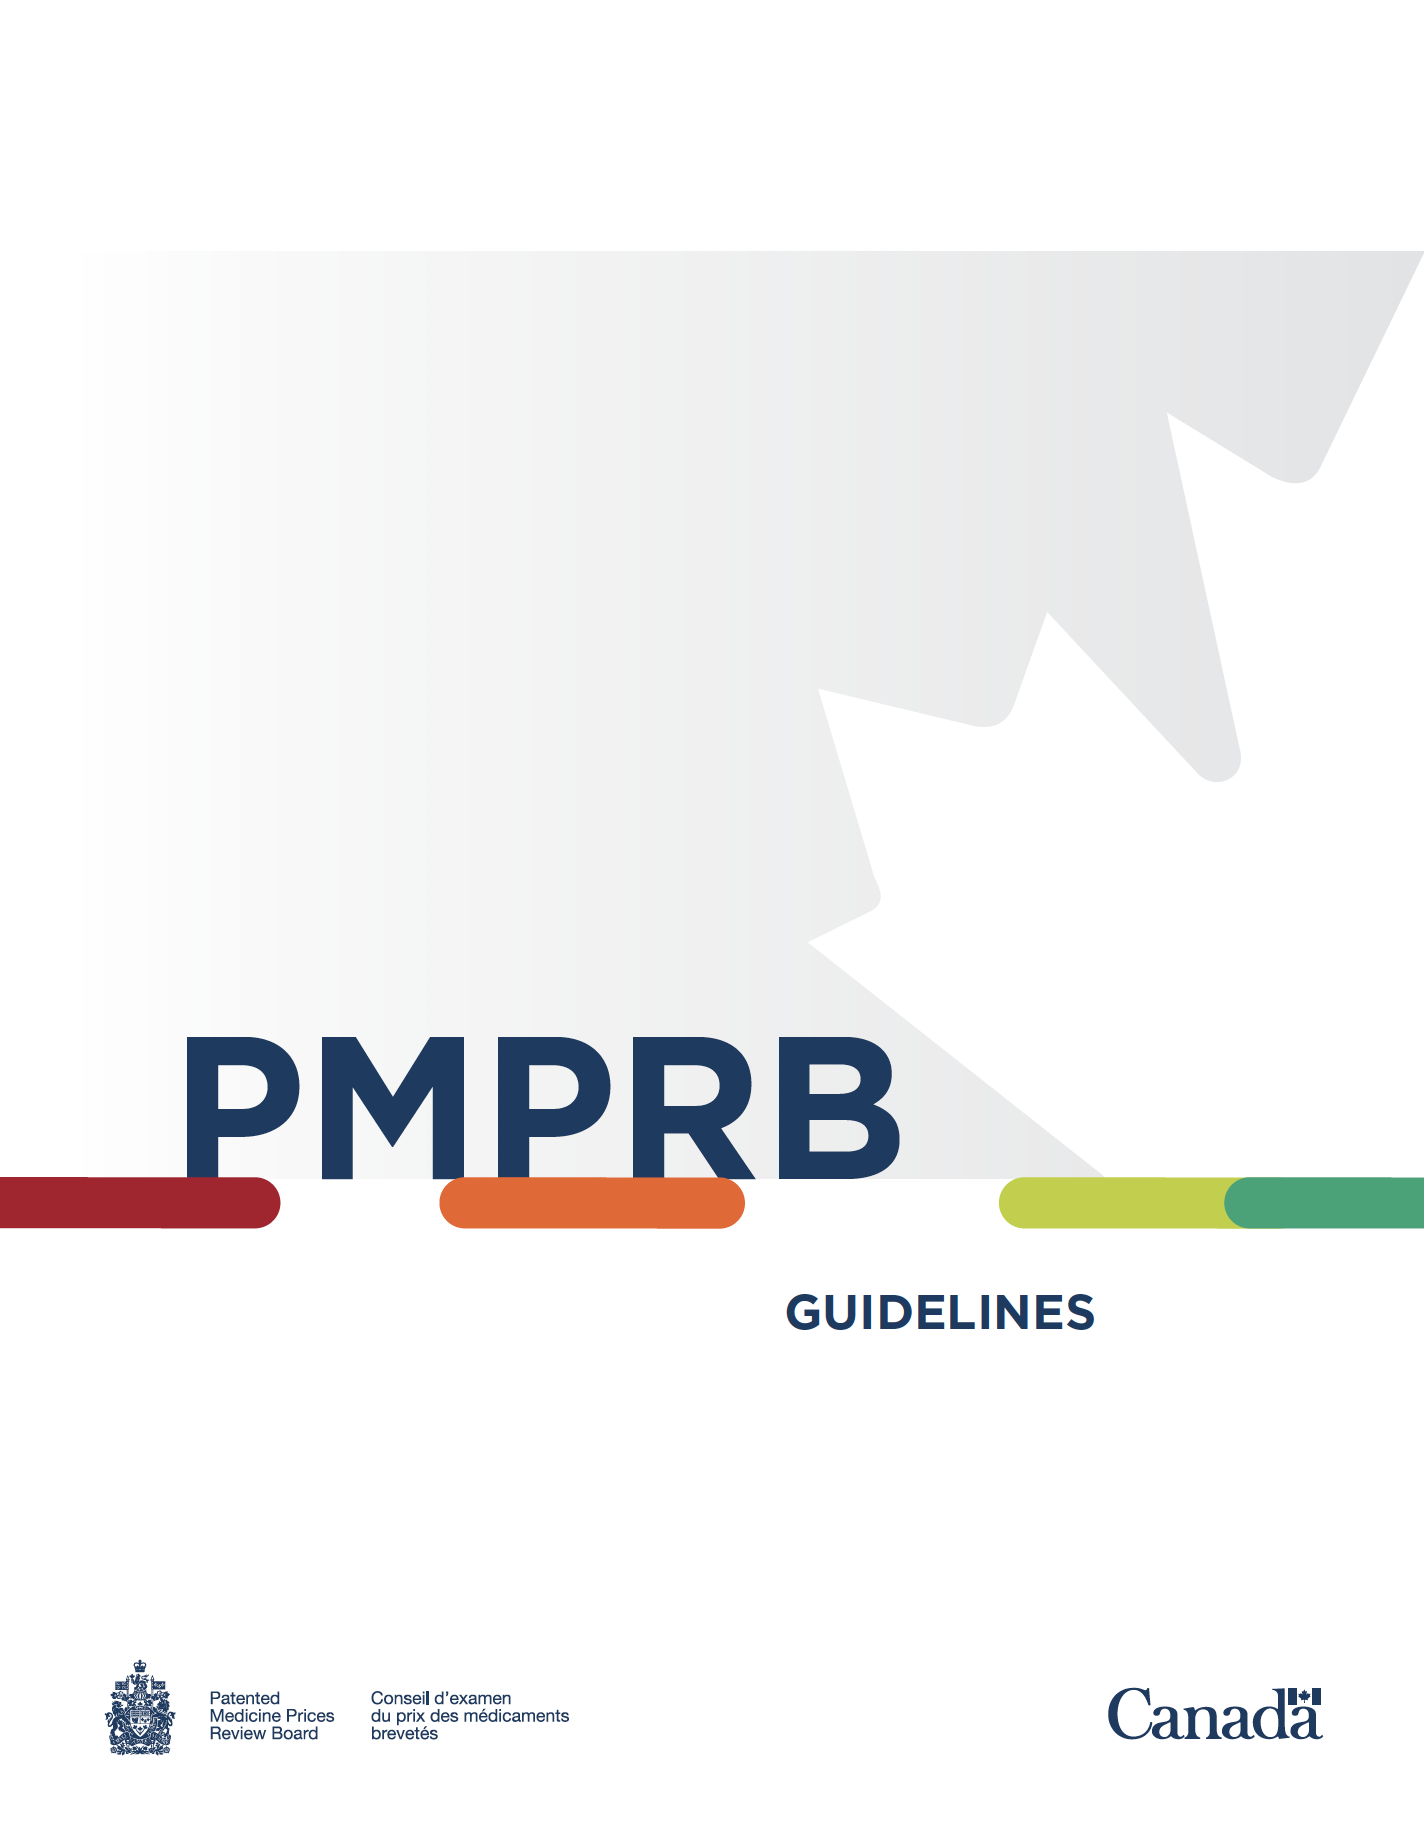 PMPRB Guidelines 2020